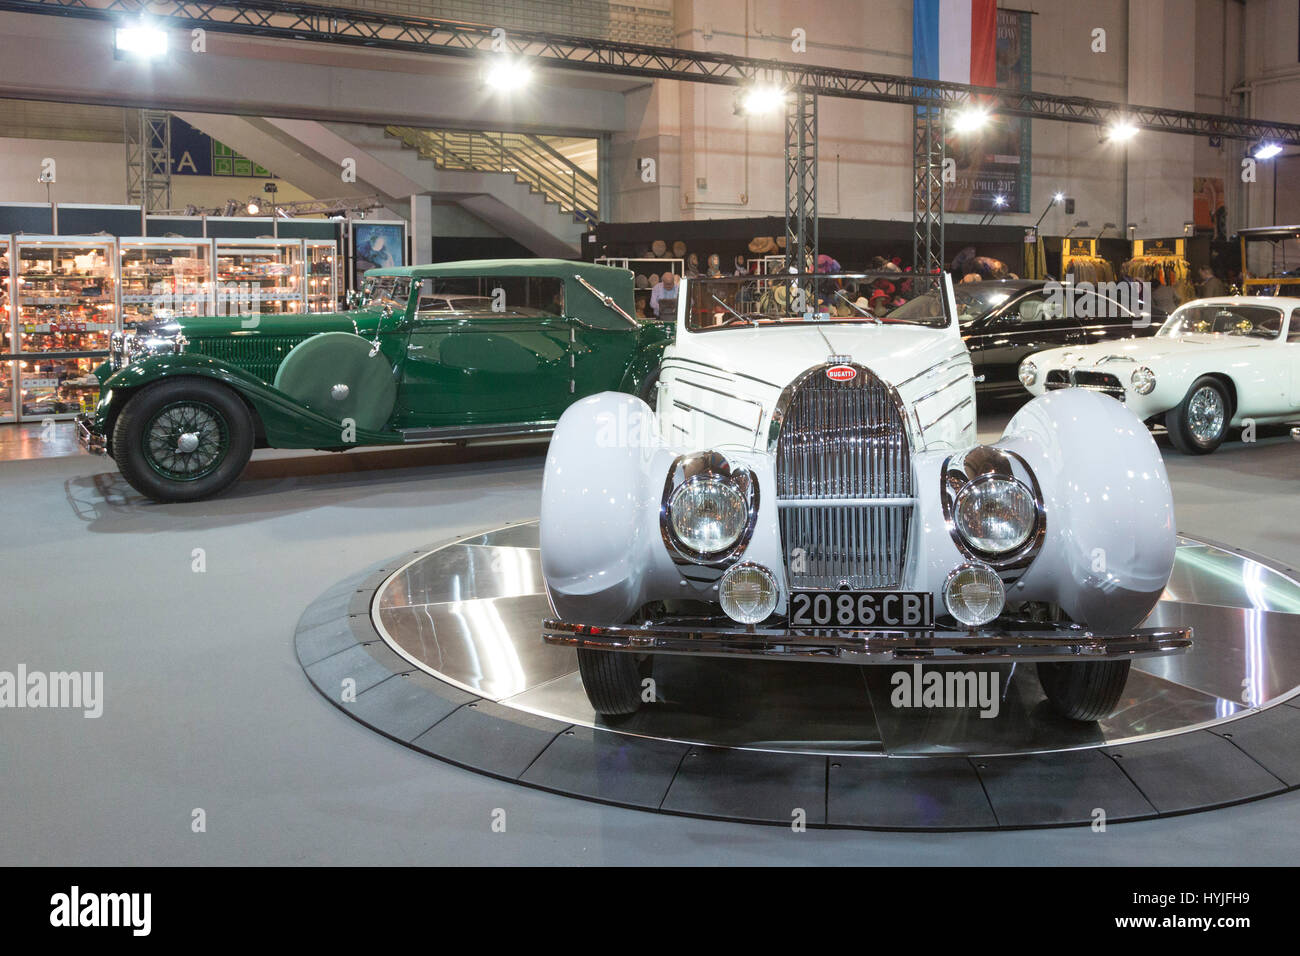 Essen, Germany. 5th Apr, 2017. Press preview of the 29th Techno-Classica motor show in Essen, show for vintage, classic and prestige cars and motor sports. The motor show runs from 5 to 9 April 2017. Credit: OnTheRoad/Alamy Live News Stock Photo